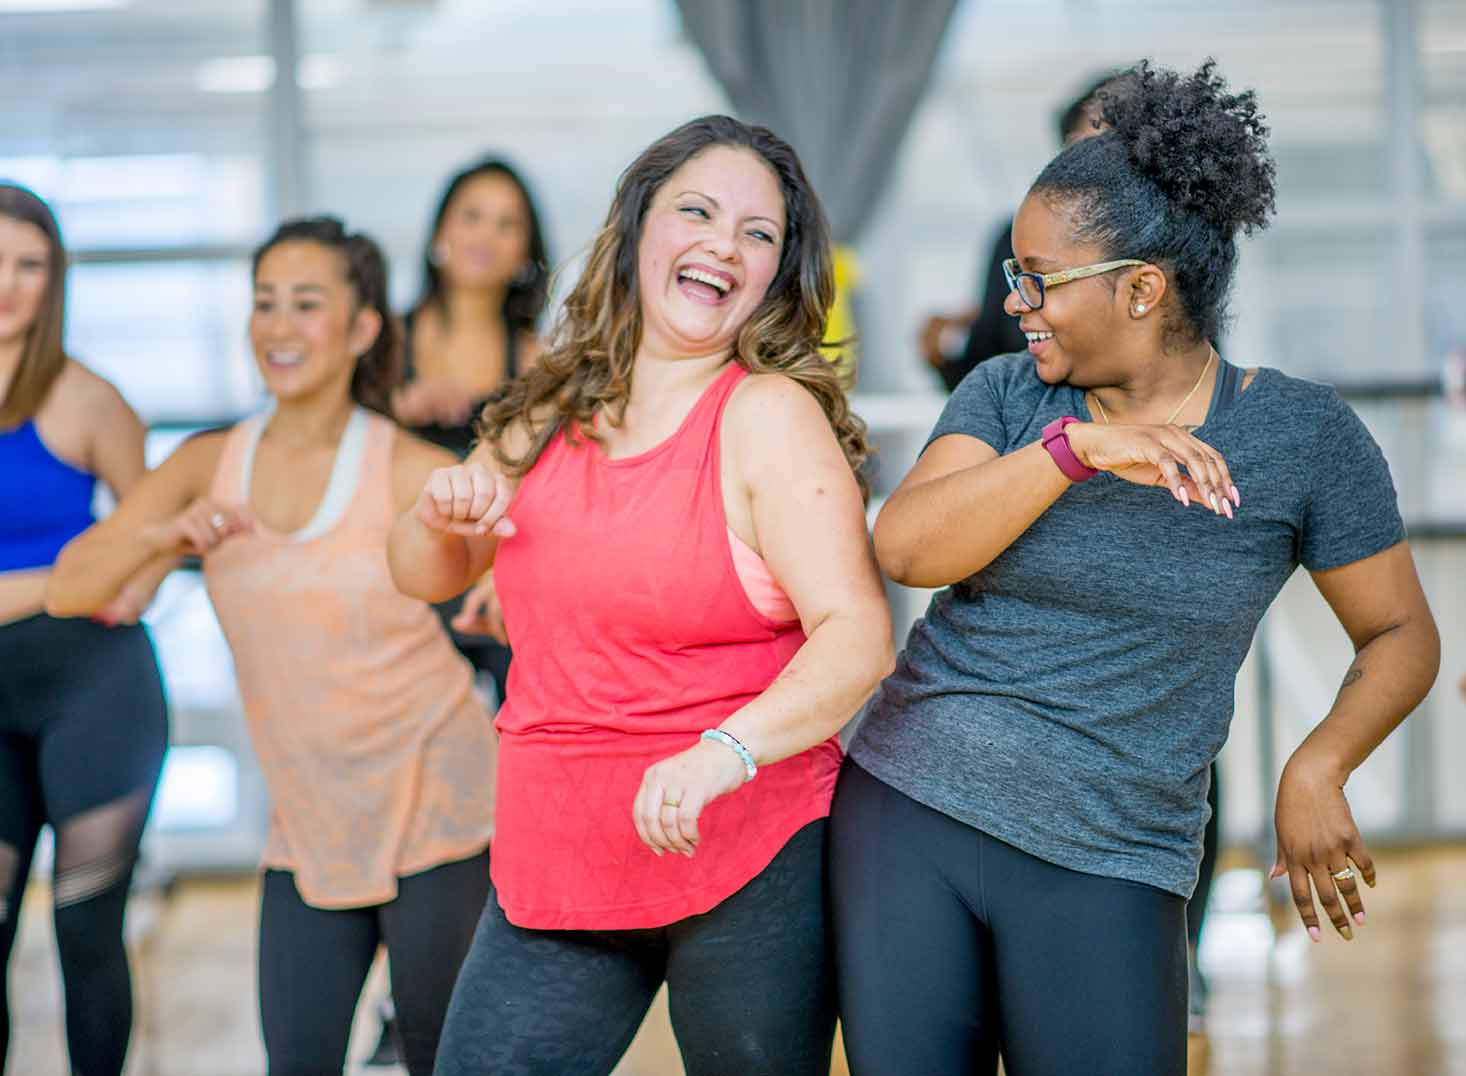 A multi-ethnic group of adult women are dancing in a fitness studio. They are wearing athletic clothes. Two women are laughing while dancing together.